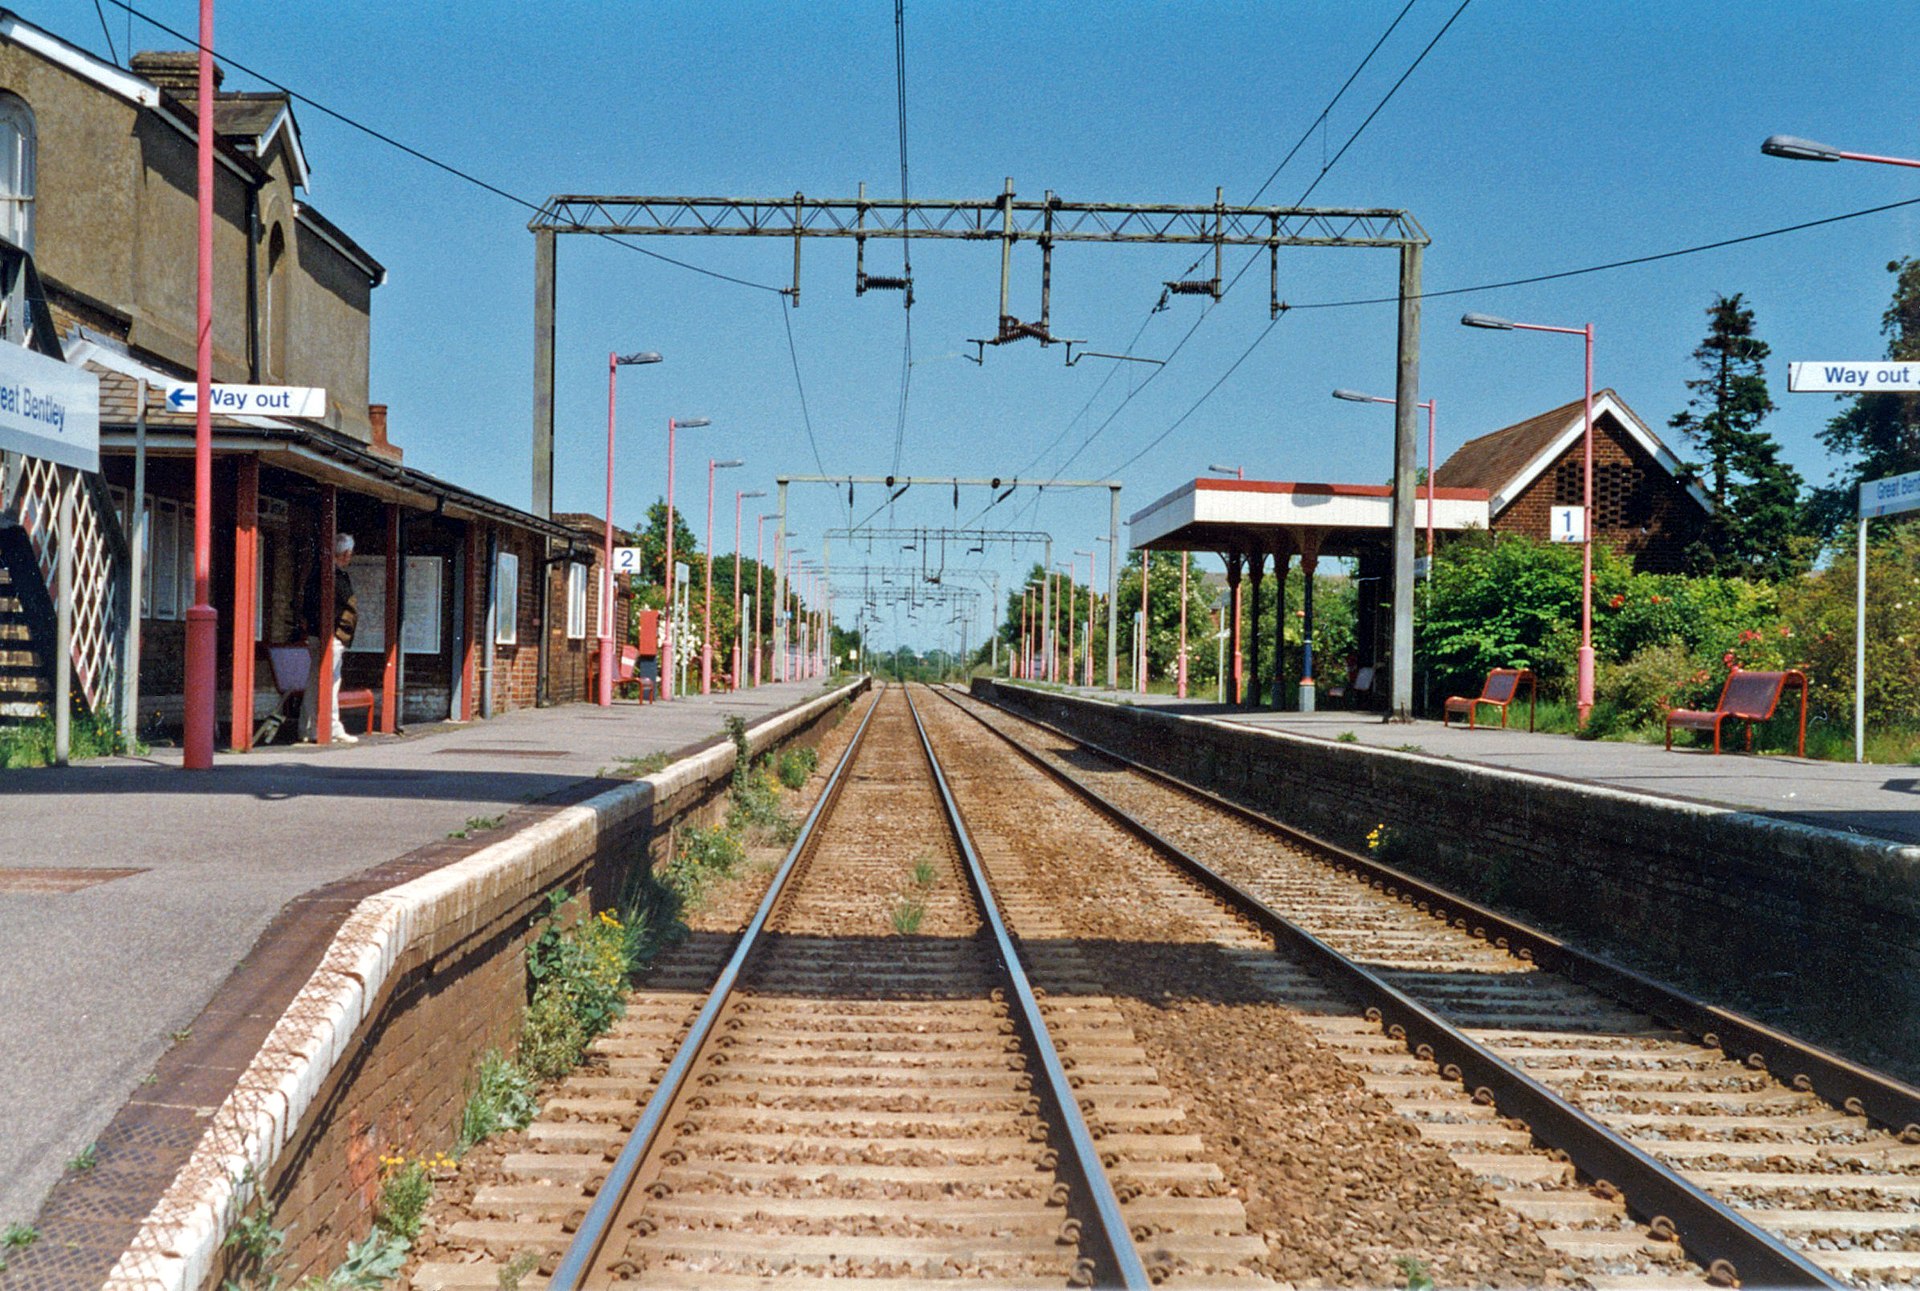 Overhead Catenary Wires and Masts